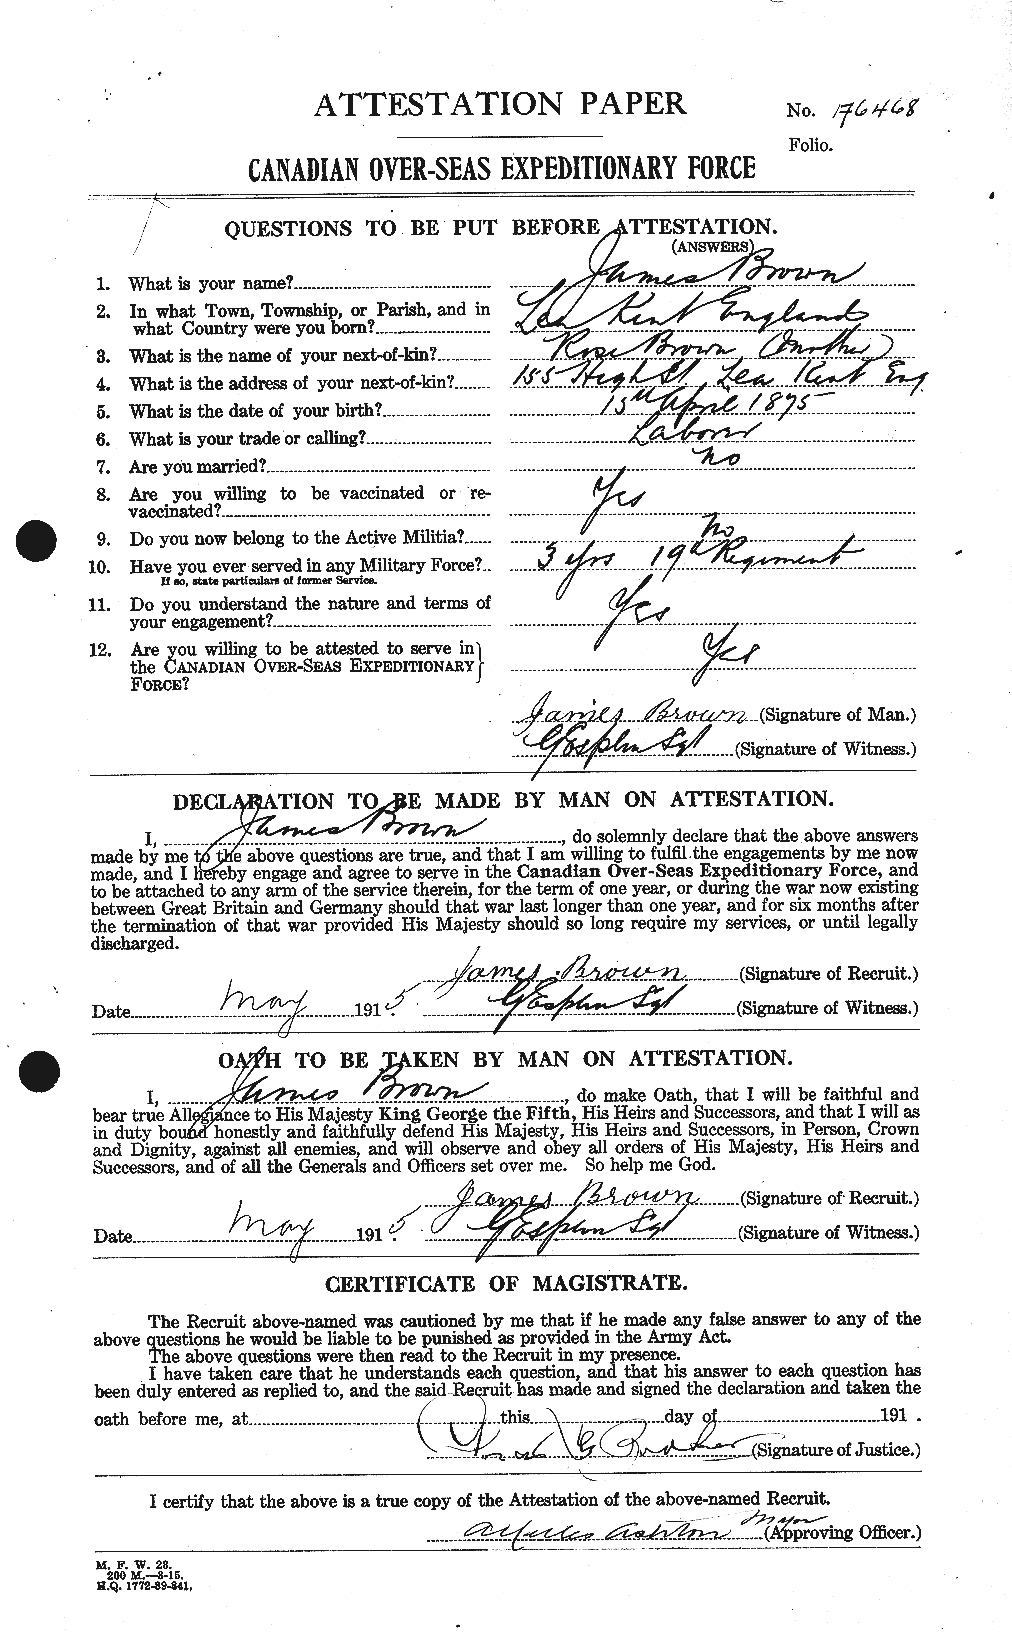 Personnel Records of the First World War - CEF 265693a